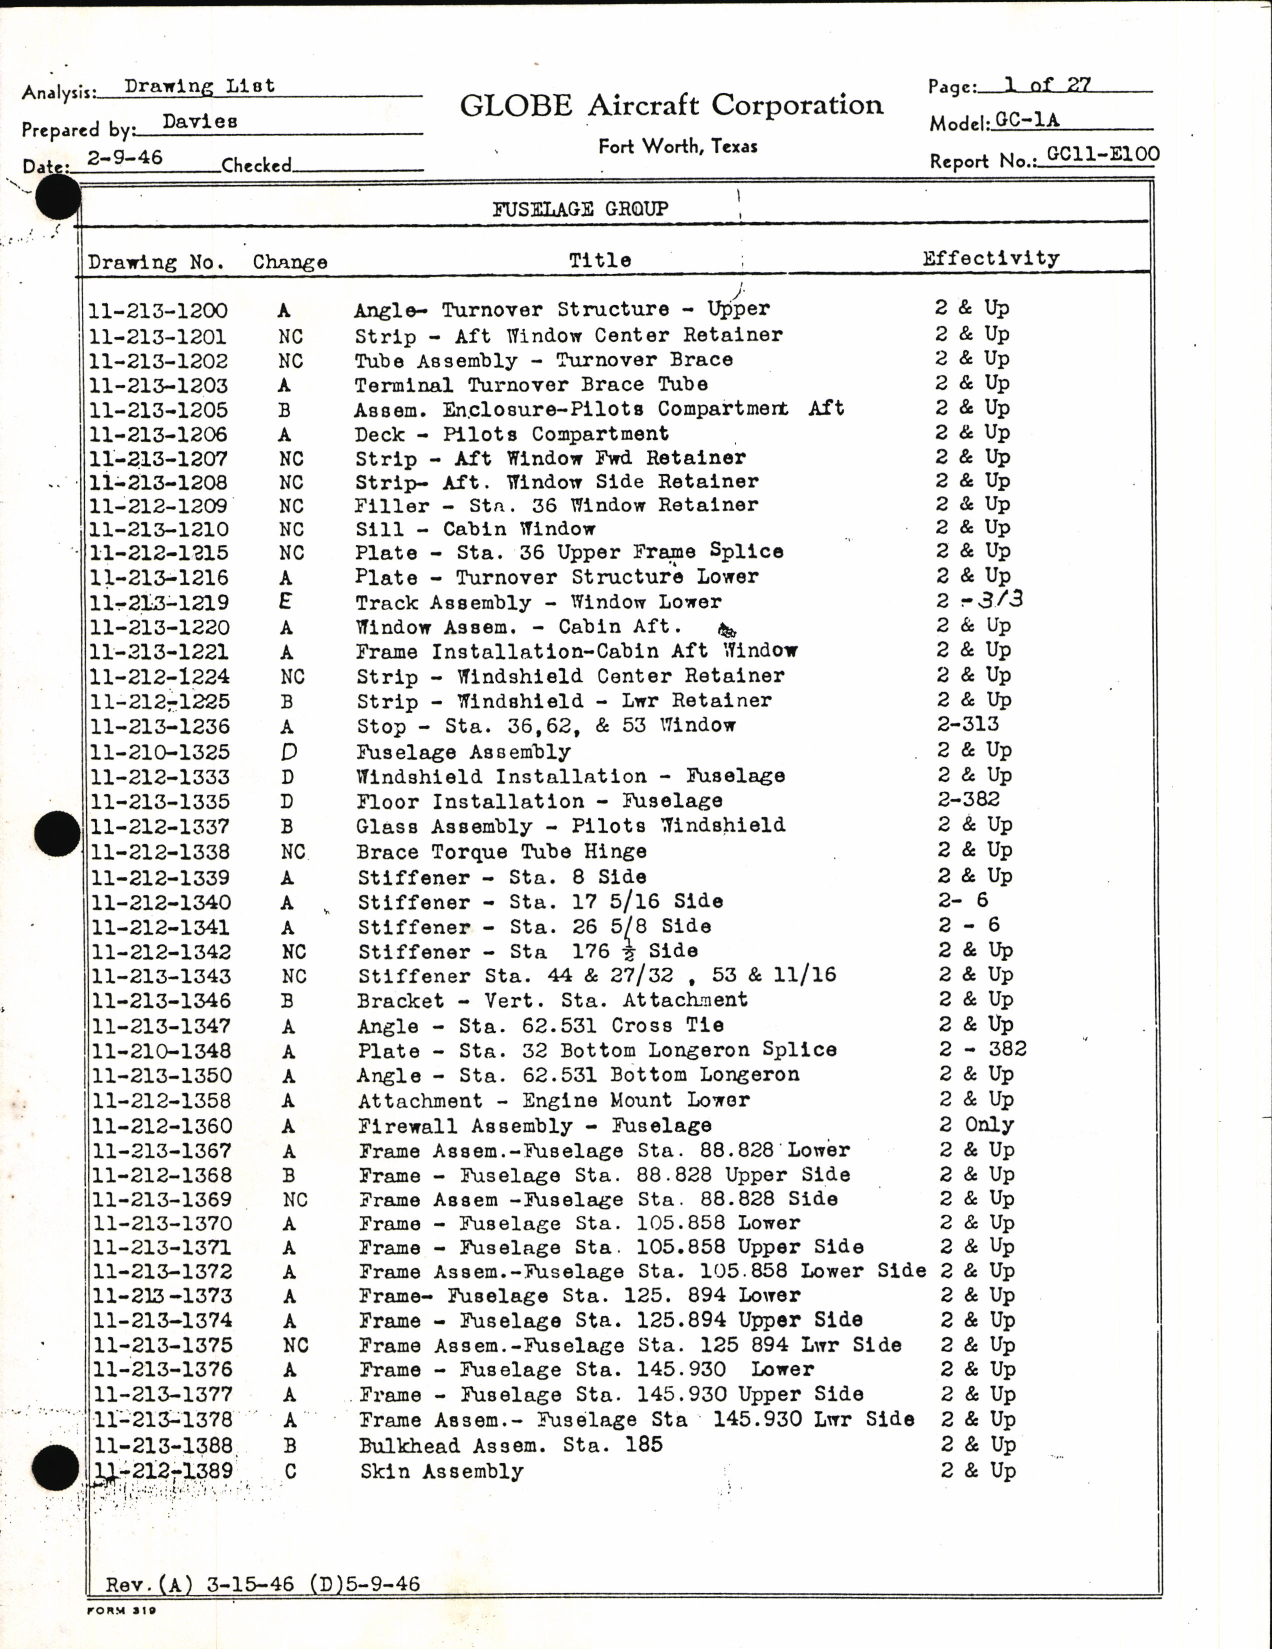 Sample page 4 from AirCorps Library document: Globe Drawing List